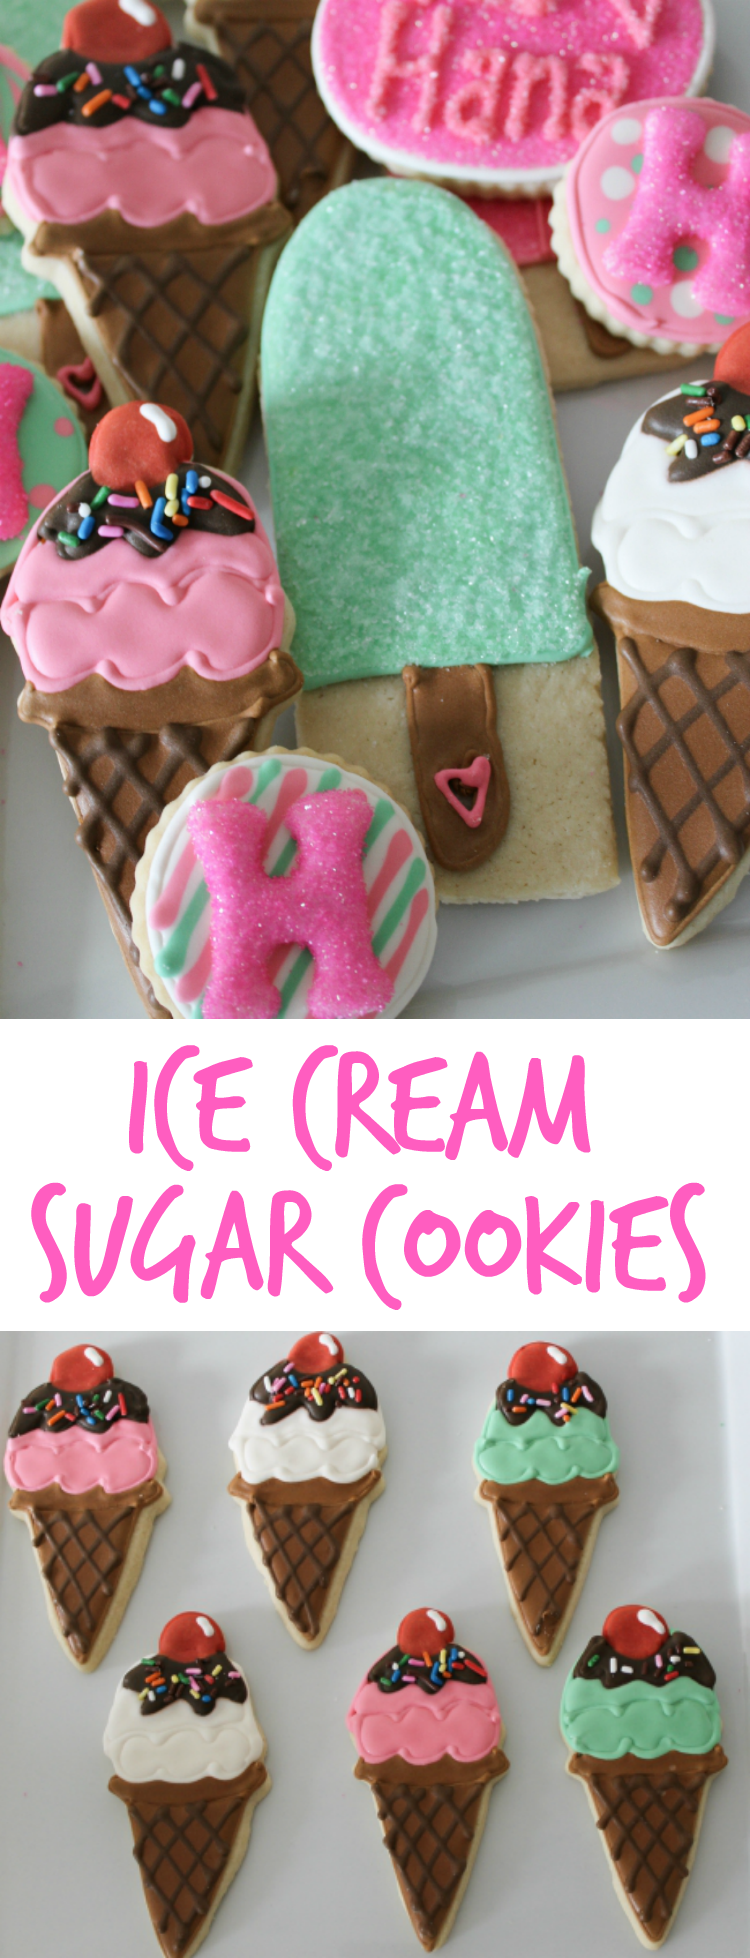 This whimsical set of Ice Cream Decorated Cookies starts with a soft, delicious sugar cookie base, and they're decorated with colorful royal icing. These cookies have all the fun of ice cream without any of the melted mess!  The Crafting Foodie for OHMY-CREATIVE.COM